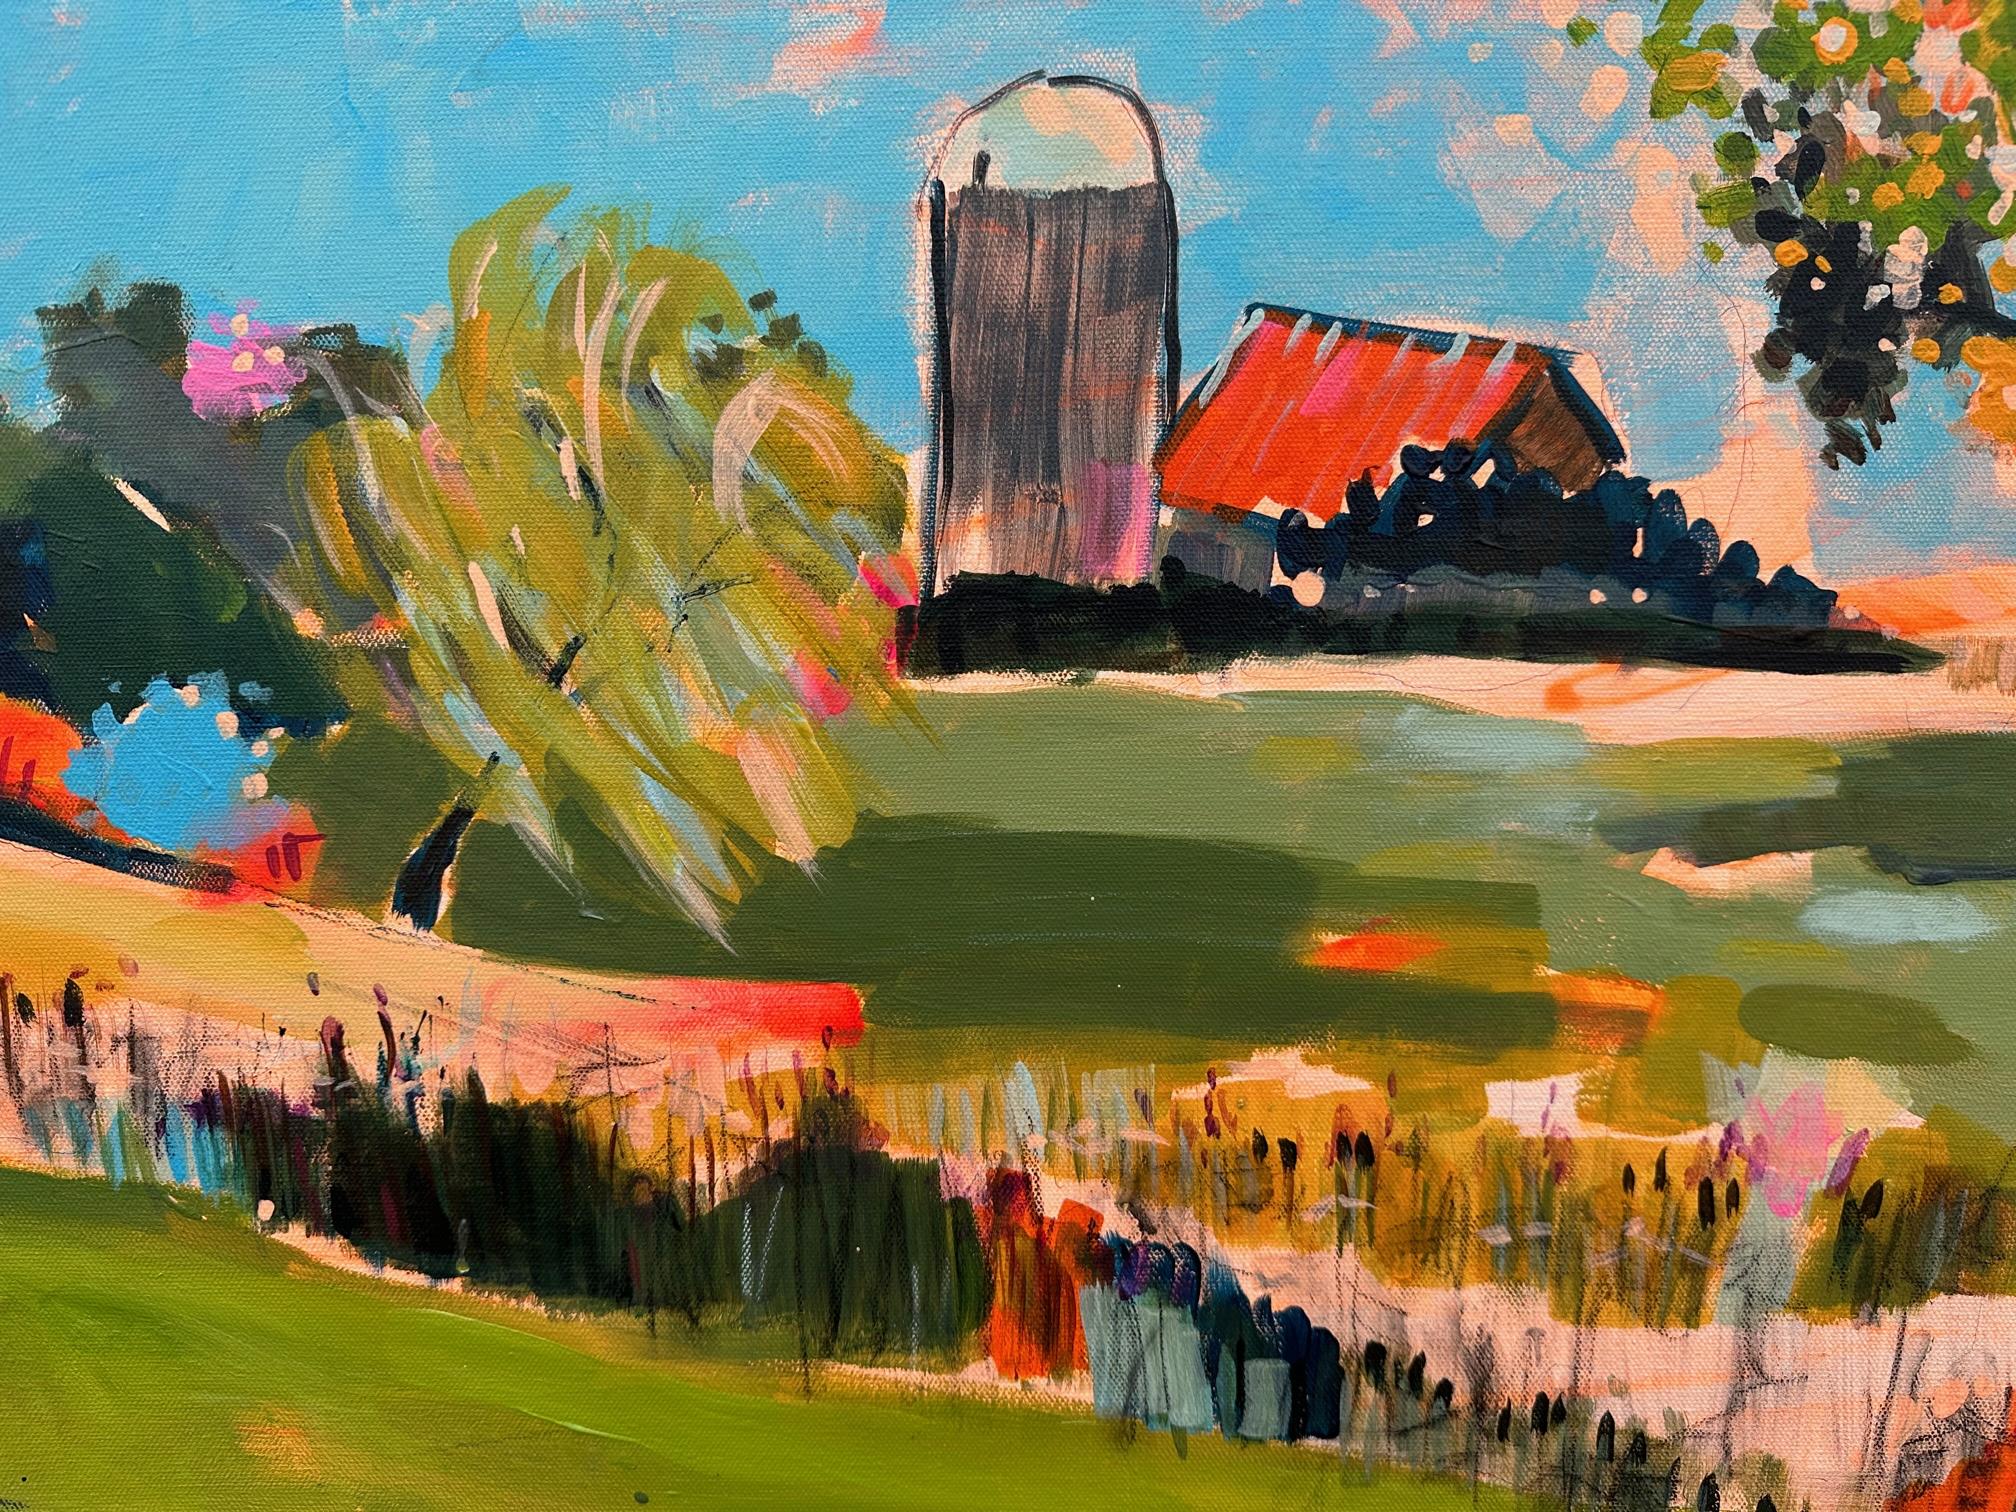 Summertime Rural Farm, Original Painting - Abstract Expressionist Art by Rebecca Klementovich